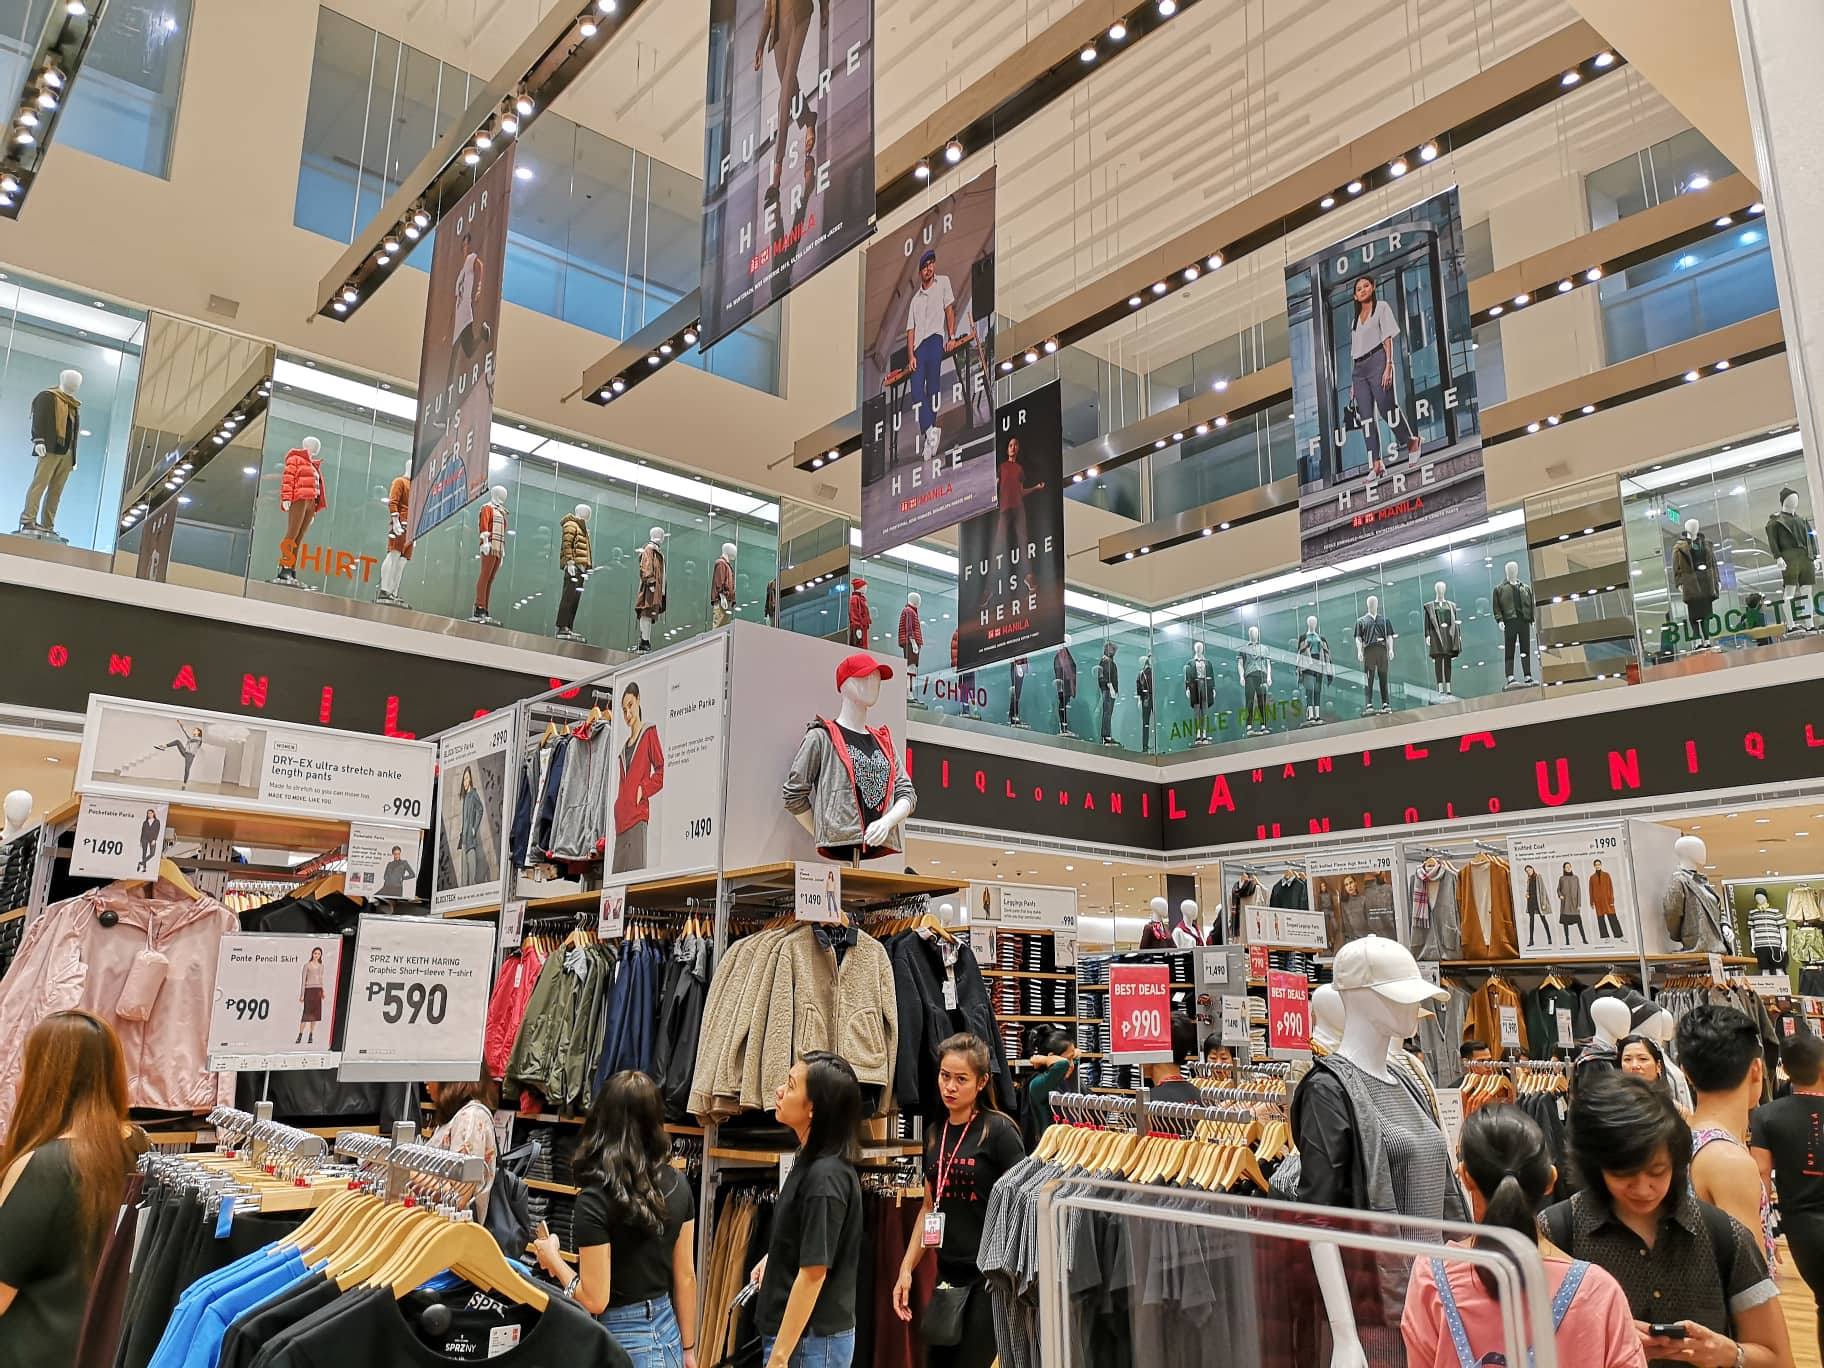 Nope that's not an Anime shop, that's the Uniqlo Manila Flagship Store